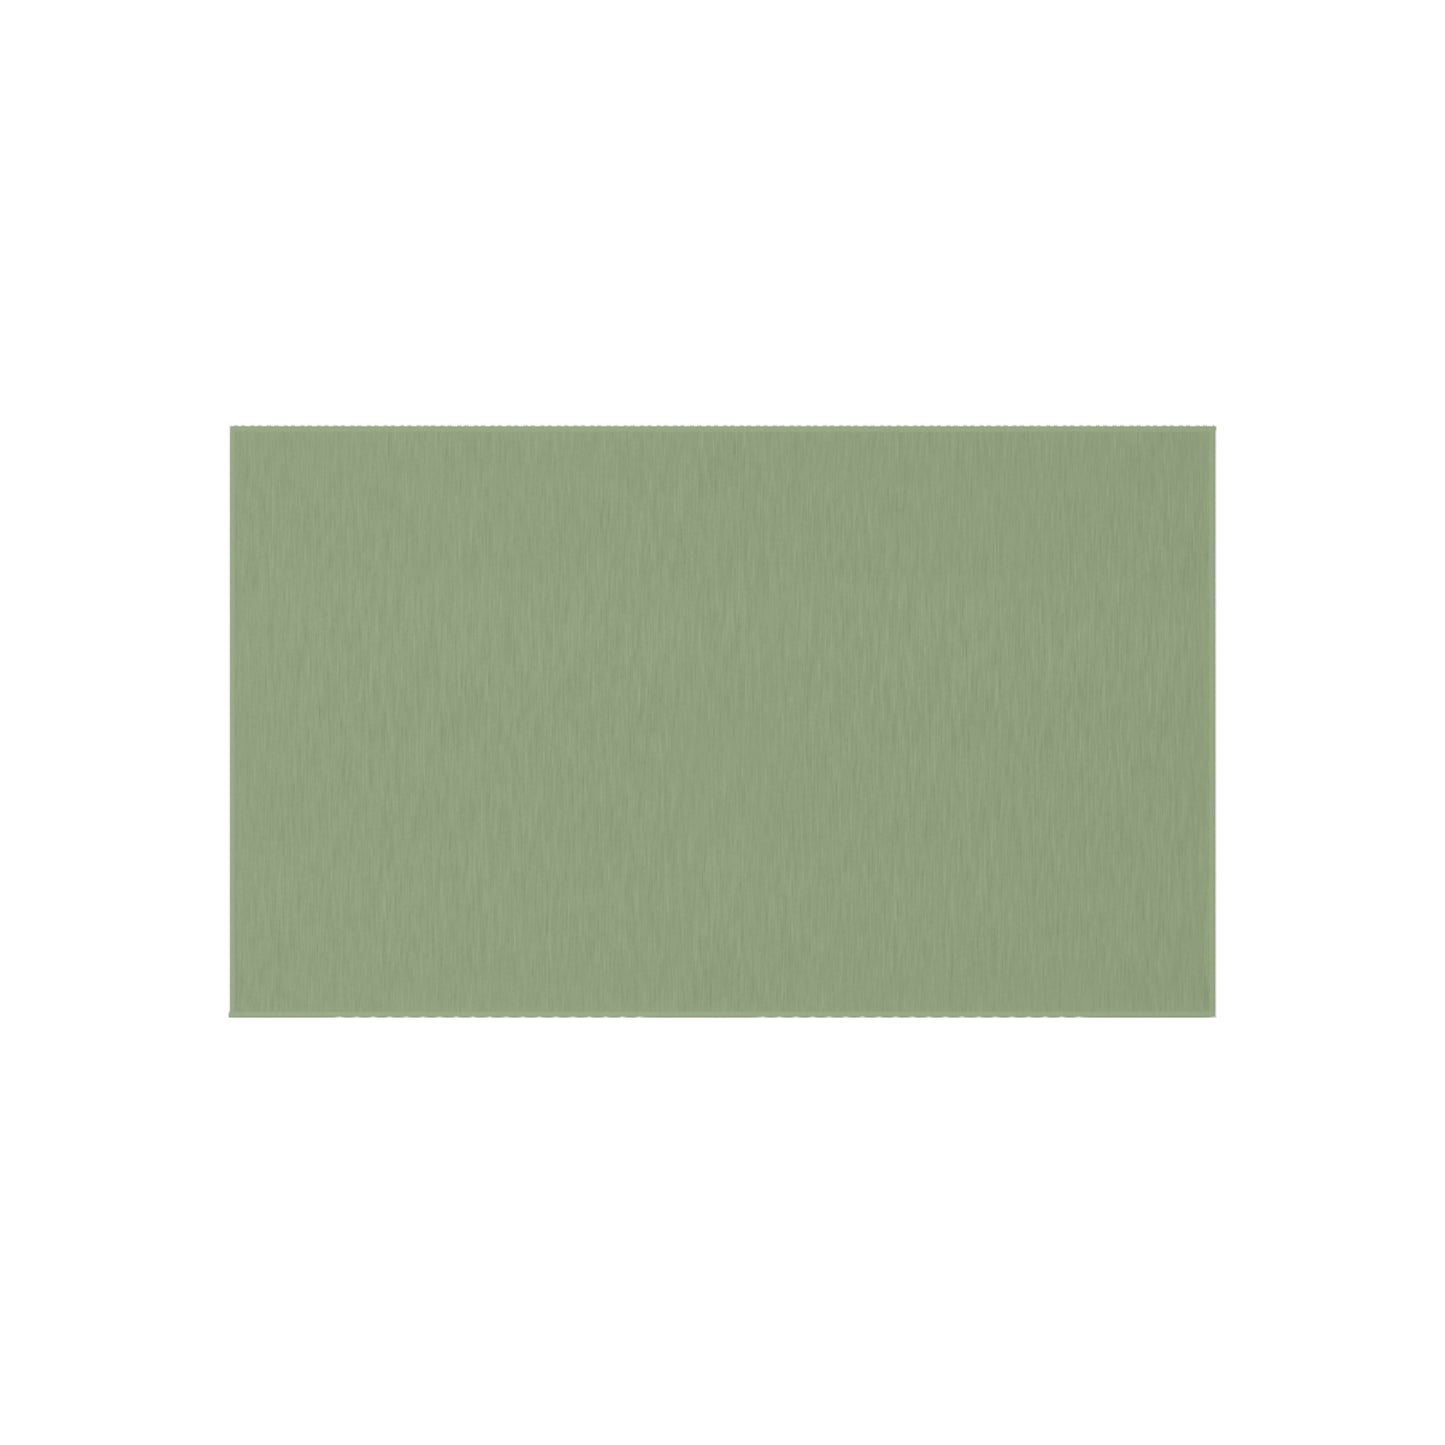 Sage Green Outdoor Area Rug, Light Olive Waterproof Carpet Home Floor Decor Large 2x3 4x6 3x5 5x7 9x10 Patio Small Large Camping Mat